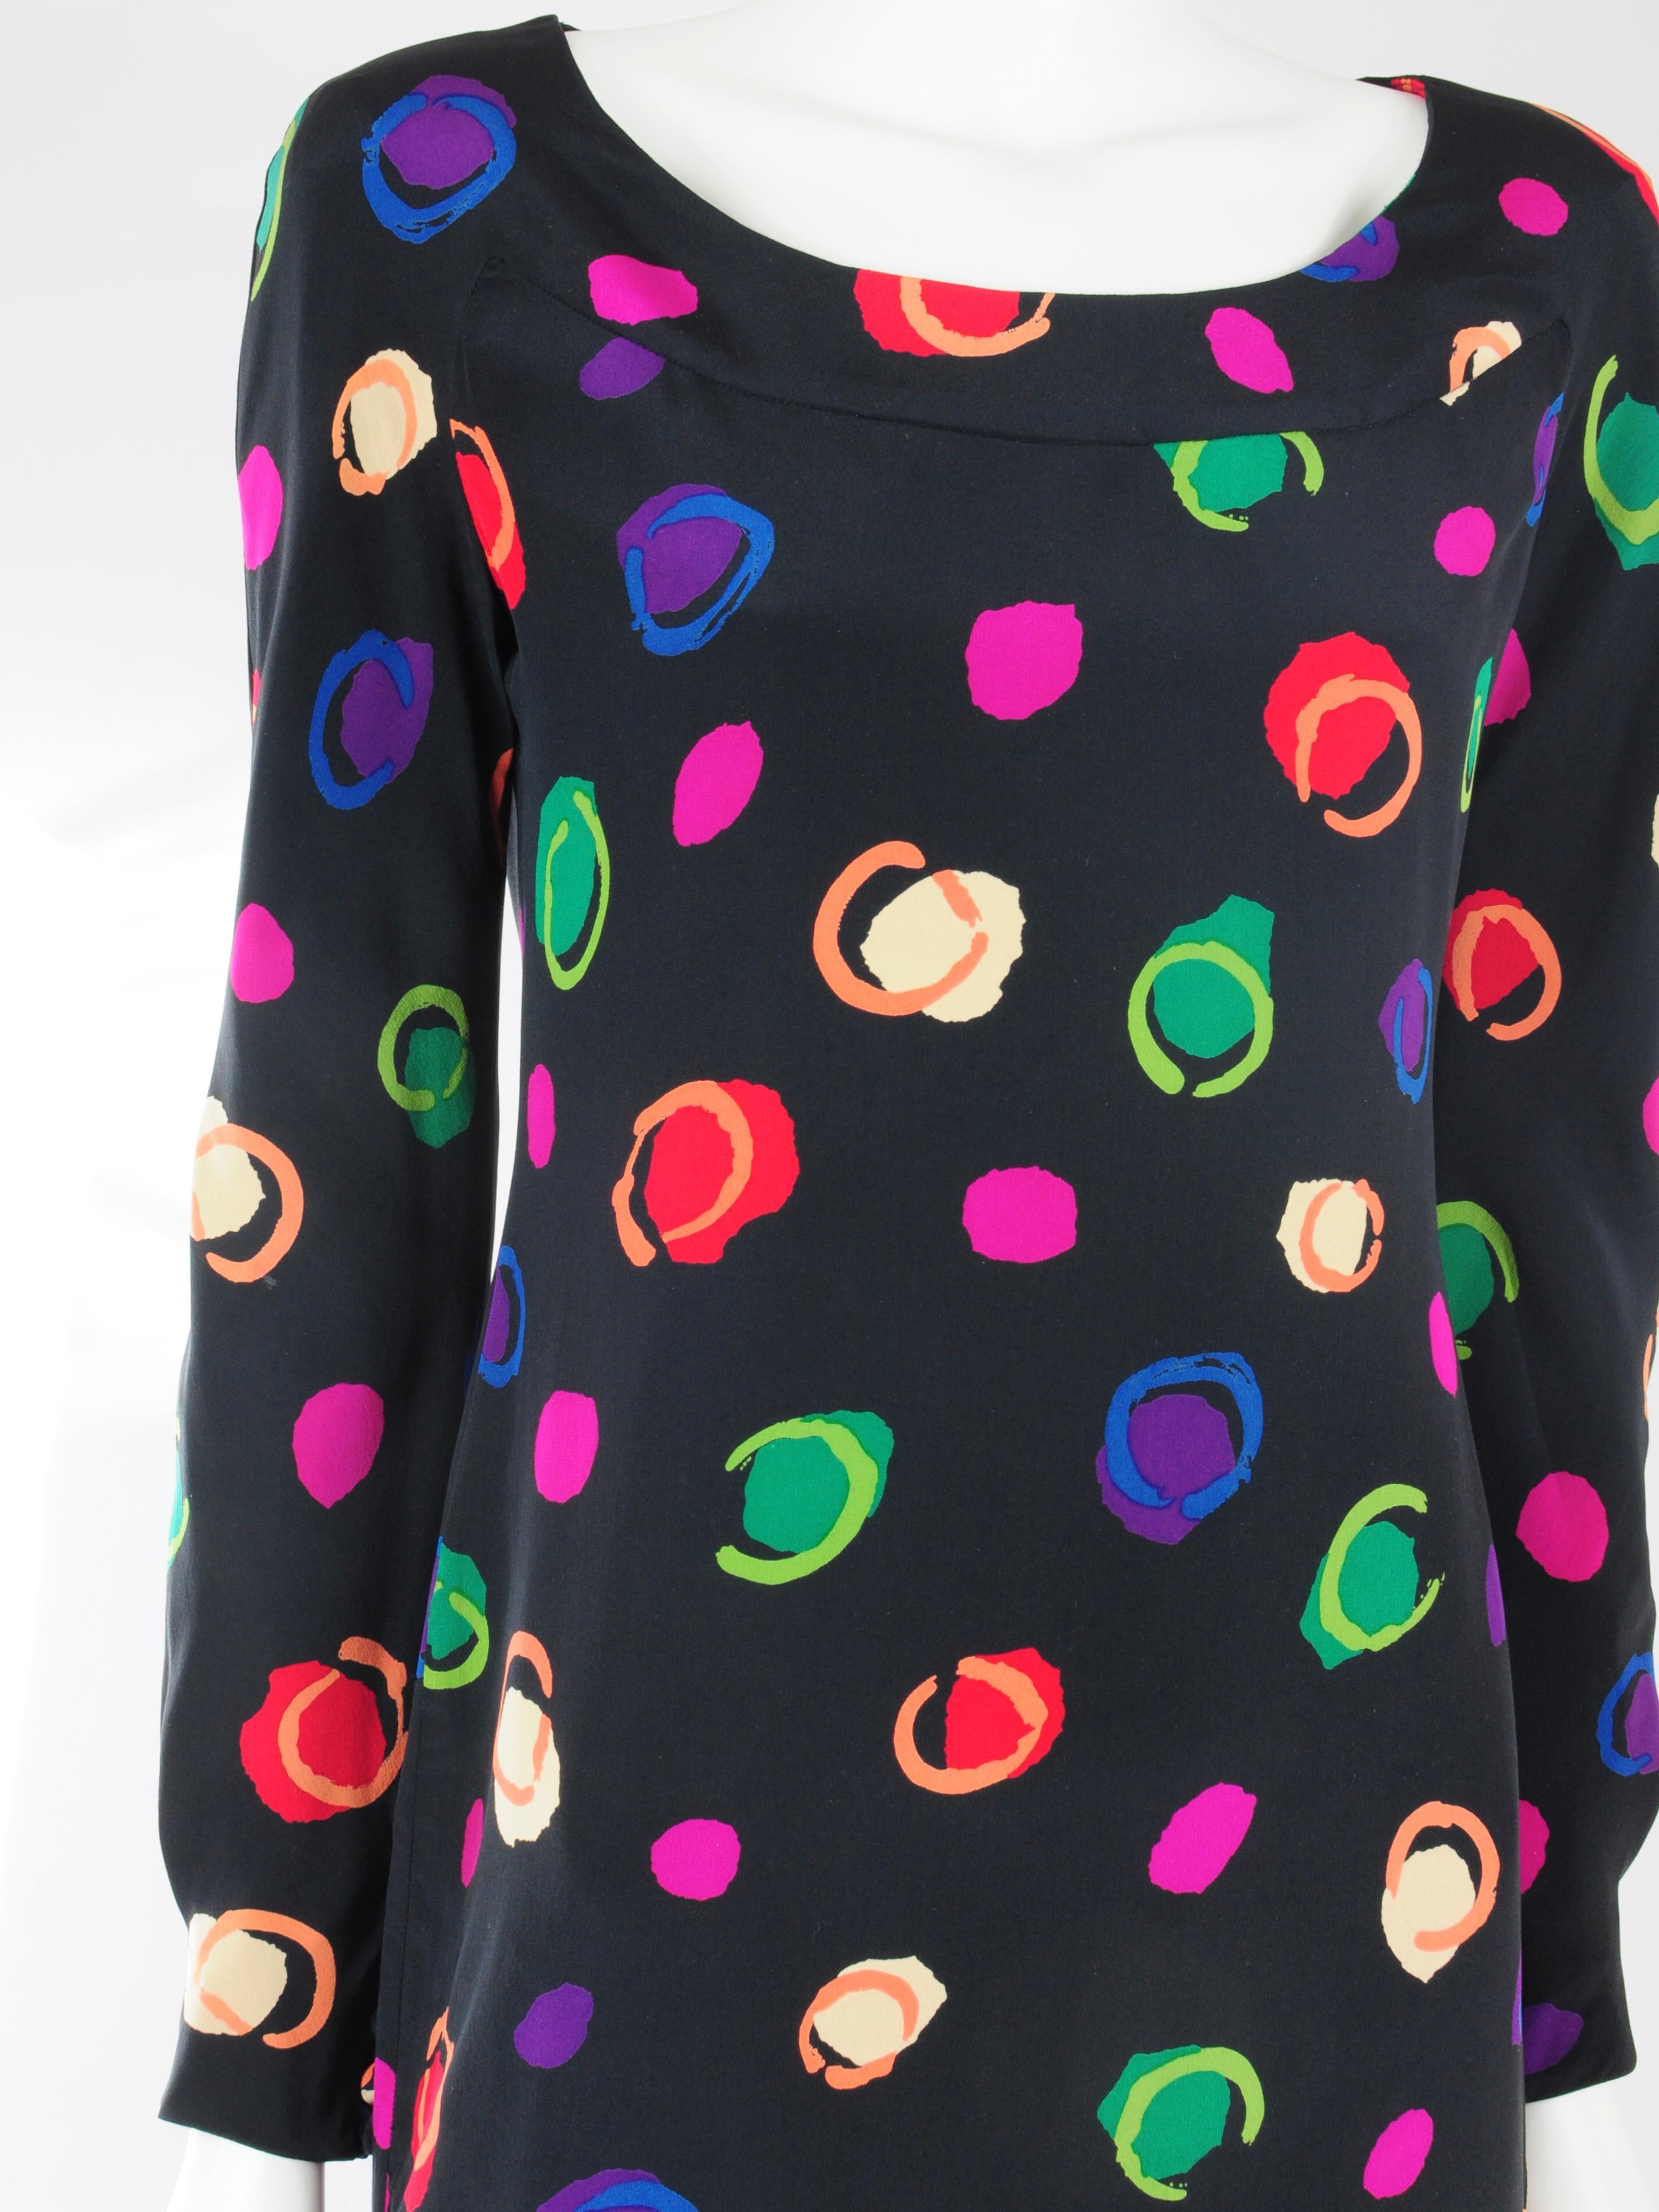 ITEM DESCRIPTION
Vintage silk pencil dress with multicolour dots by Albert Nipon from the 1980s. Features an above knee length, round neckline and button details on the sleeves. It is both chique as fun with the dotted print being in rainbow